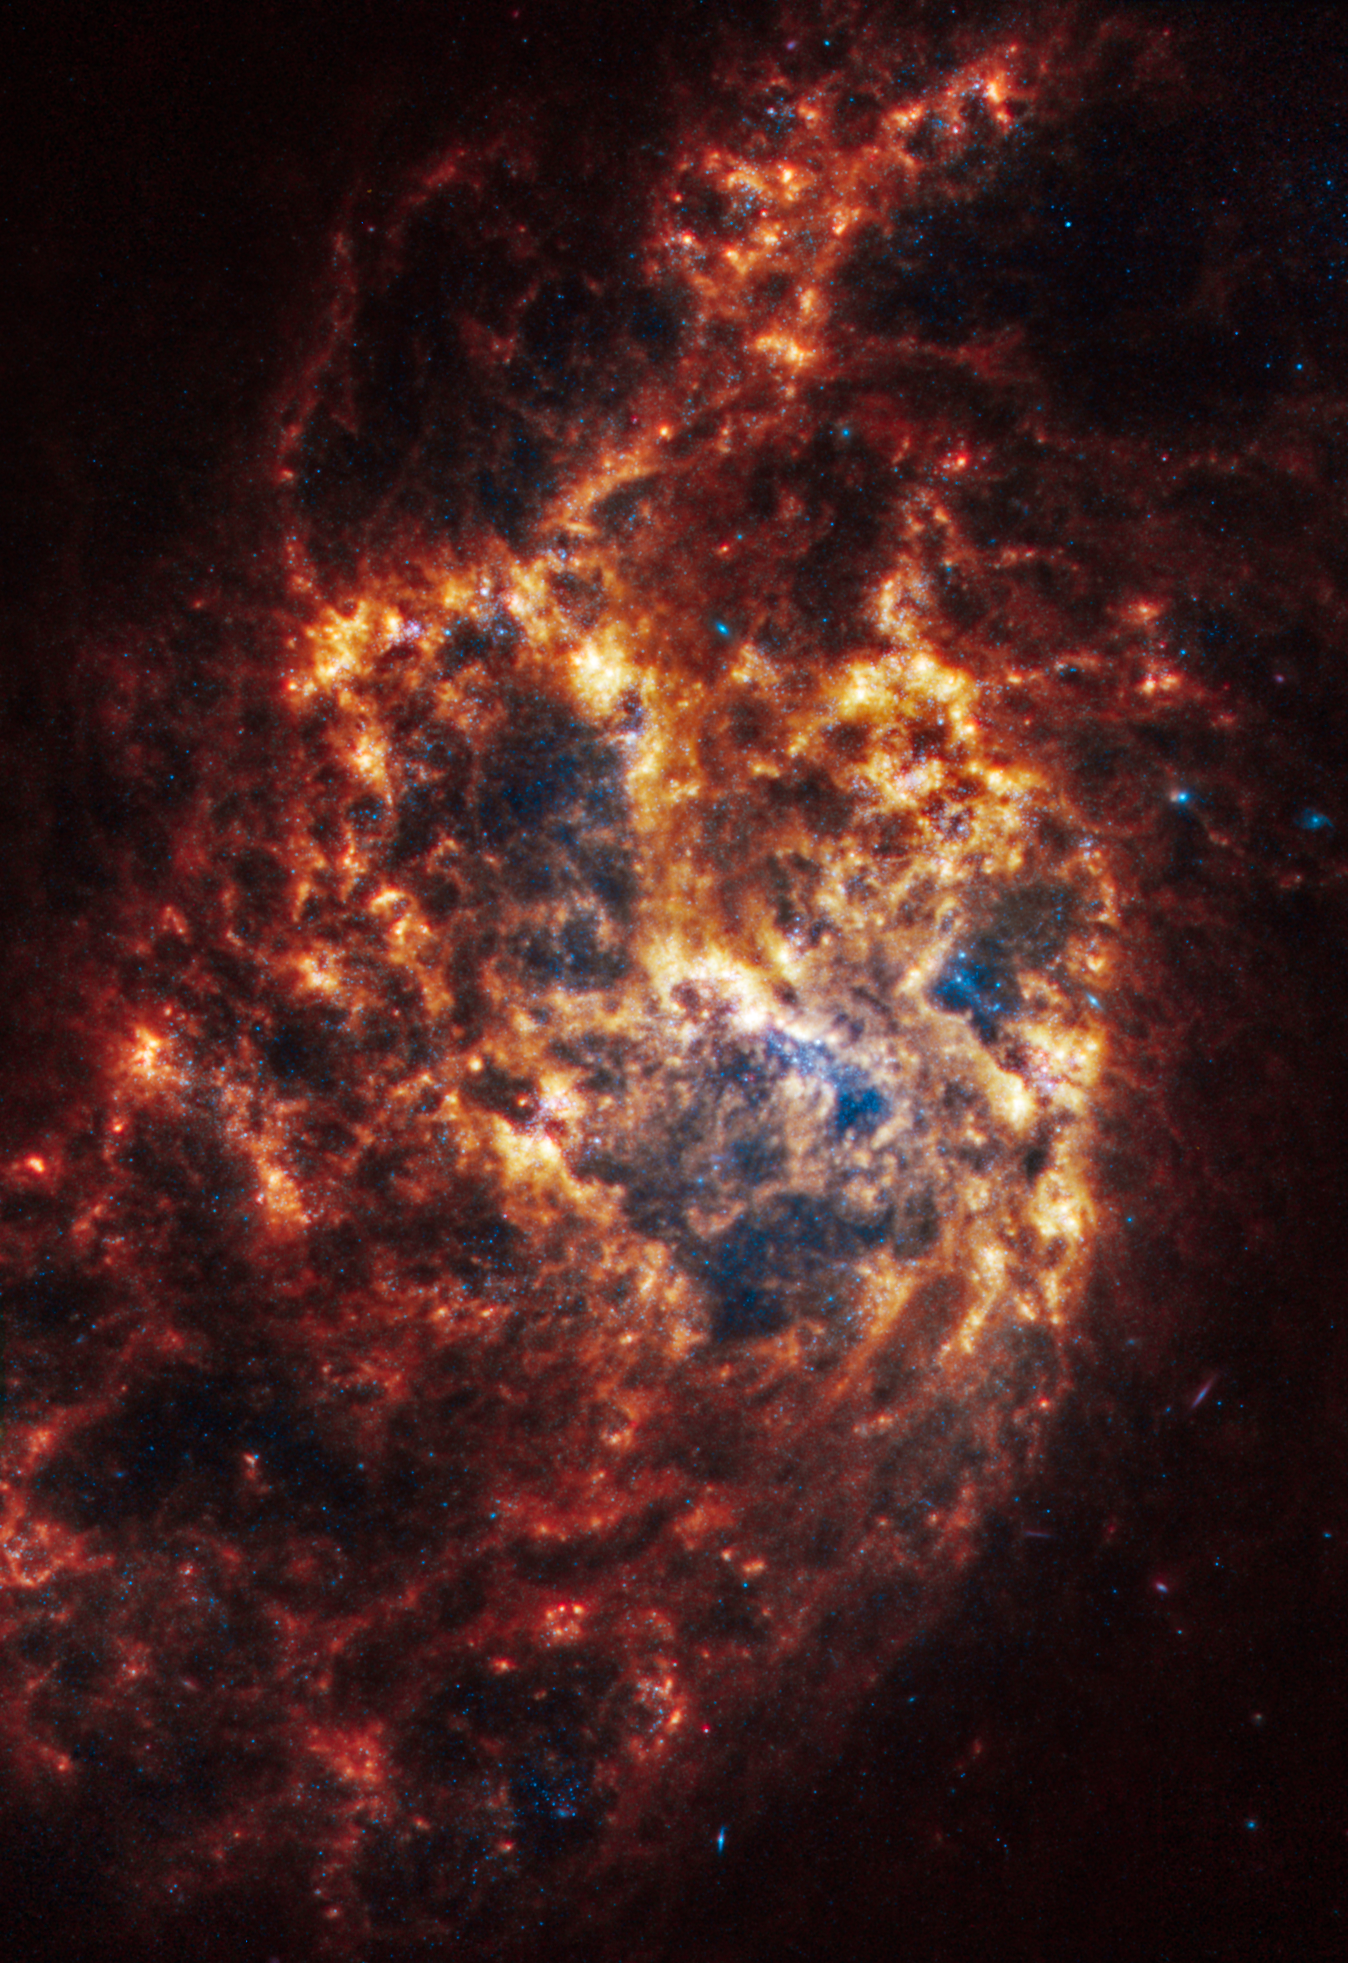 Webb’s image of NGC 1385 shows a messy face-on spiral galaxy in shades of white, yellow, orange, and red. There’s a bright yellow arc-shaped region toward the center, but it is very difficult to see a spiral shape. Scattered across the scene are some bright blue pinpoints of light, but they appear more clearly in areas where it is dark gray or black, below and to the right of the yellow central arc in blobs, with some individual blue points of light across the image. There are many bright red or orange regions in the orange arms, speckled irregularly throughout. The edges of the scene are dark black, containing several very faint pink, blue, and red blobs.